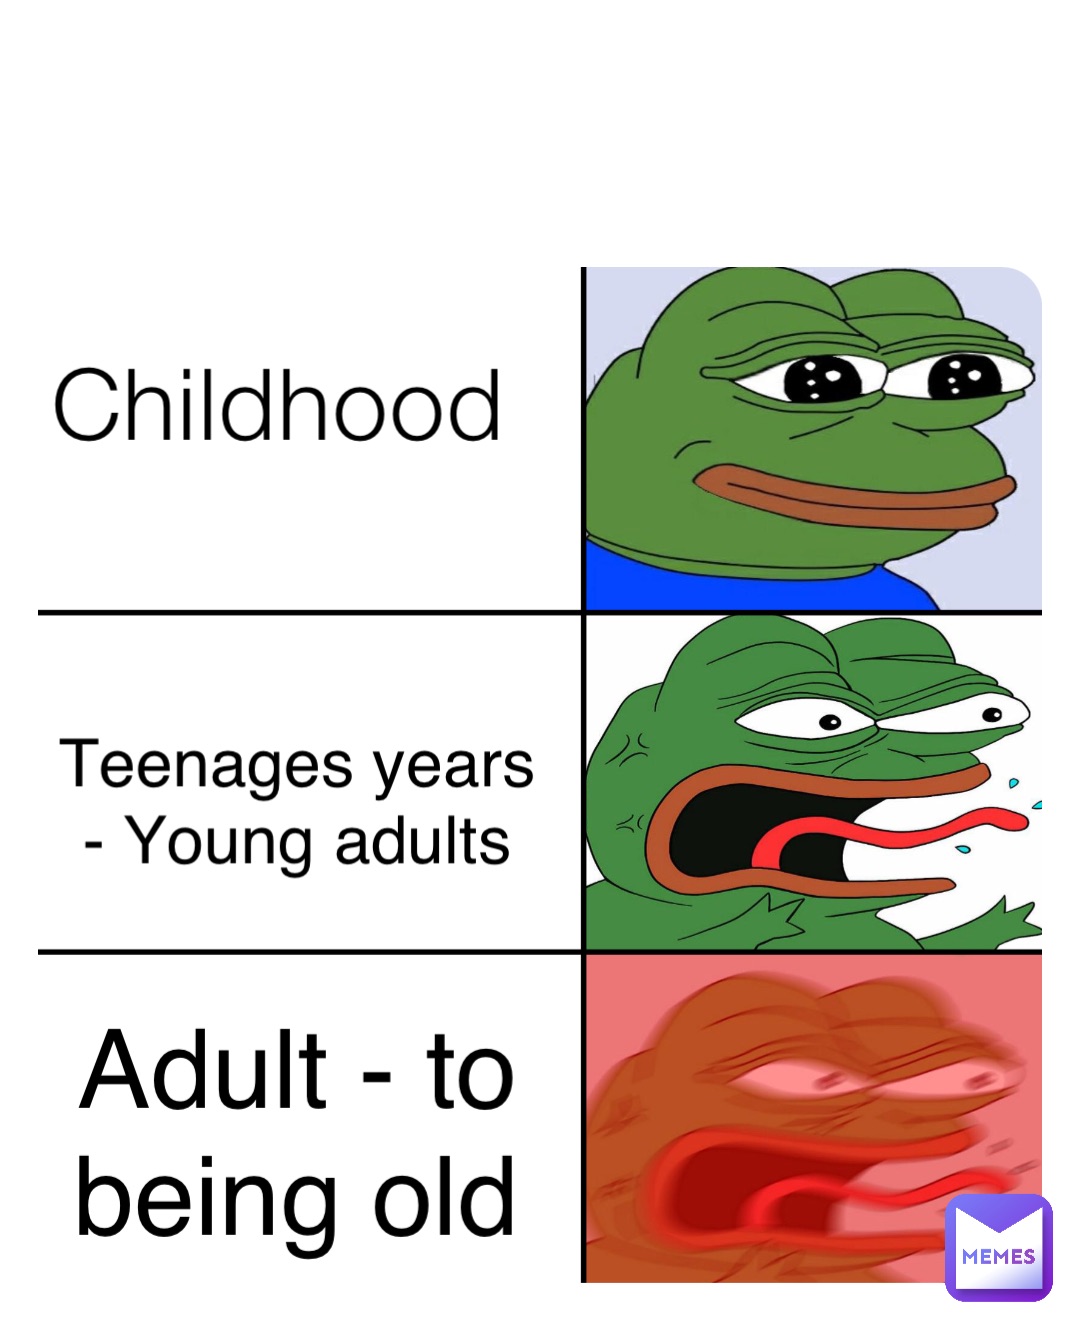 Childhood Teenages years - Young adults Adult - to being old